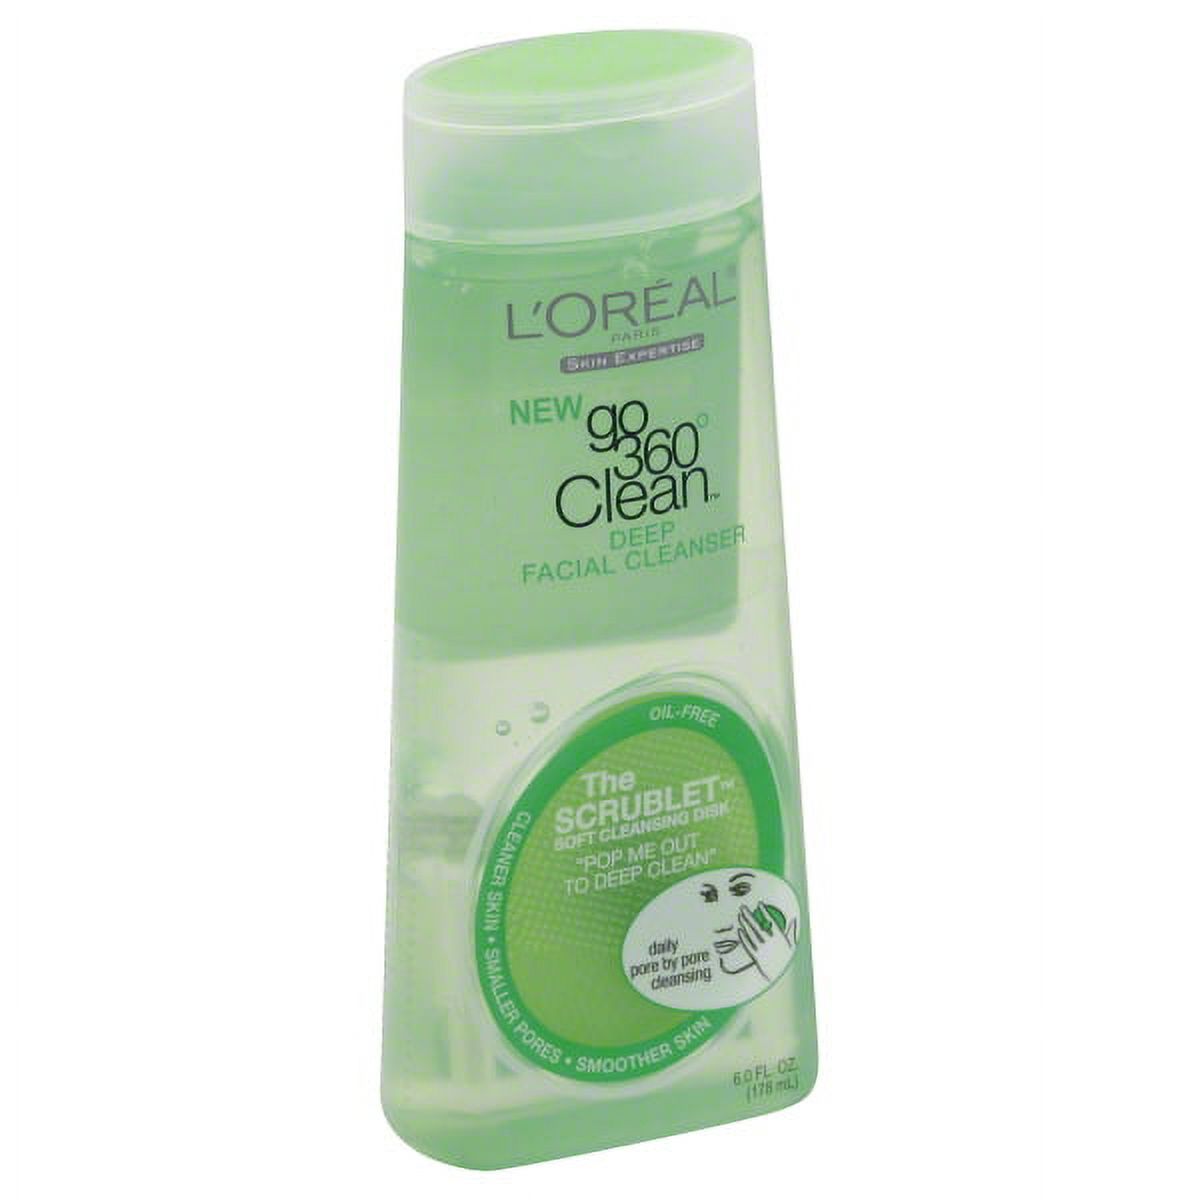 Loreal Loreal Skin Expertise Go 360 Clean Facial Cleanser, 6 oz - image 1 of 6